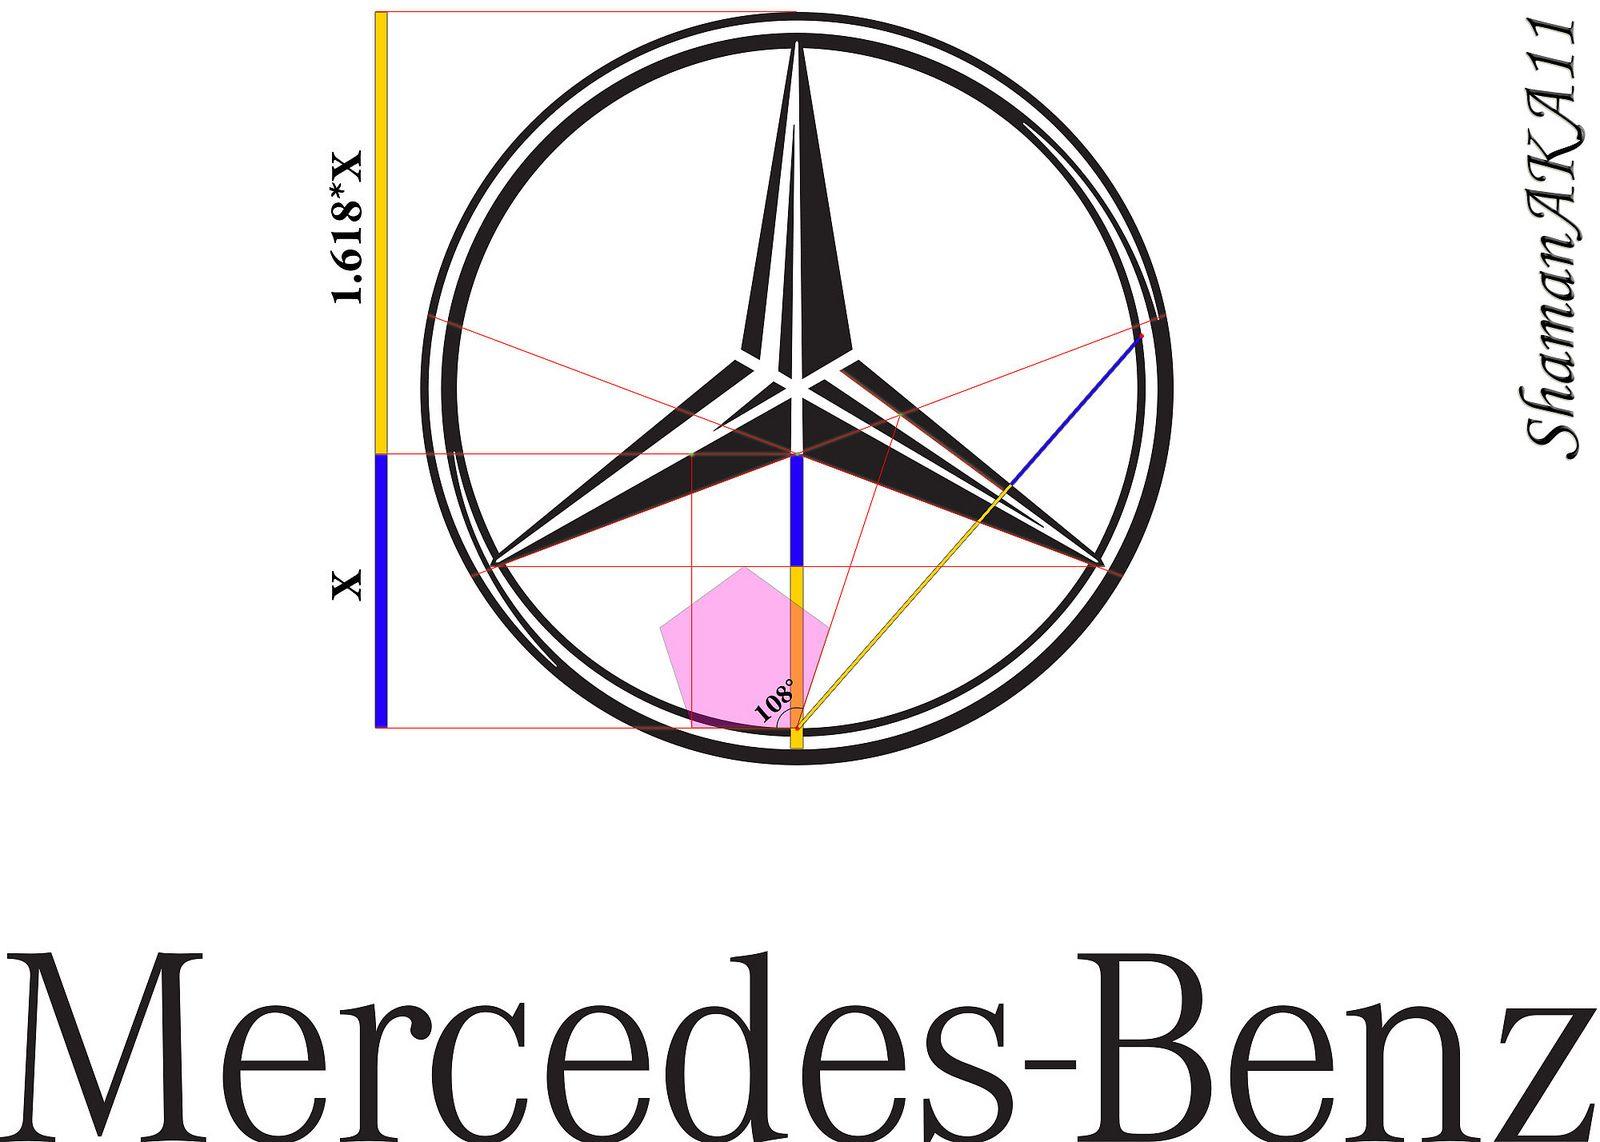 Golden Ratio Apple Logo - Car and Auto Industry Design and the Golden Ratio